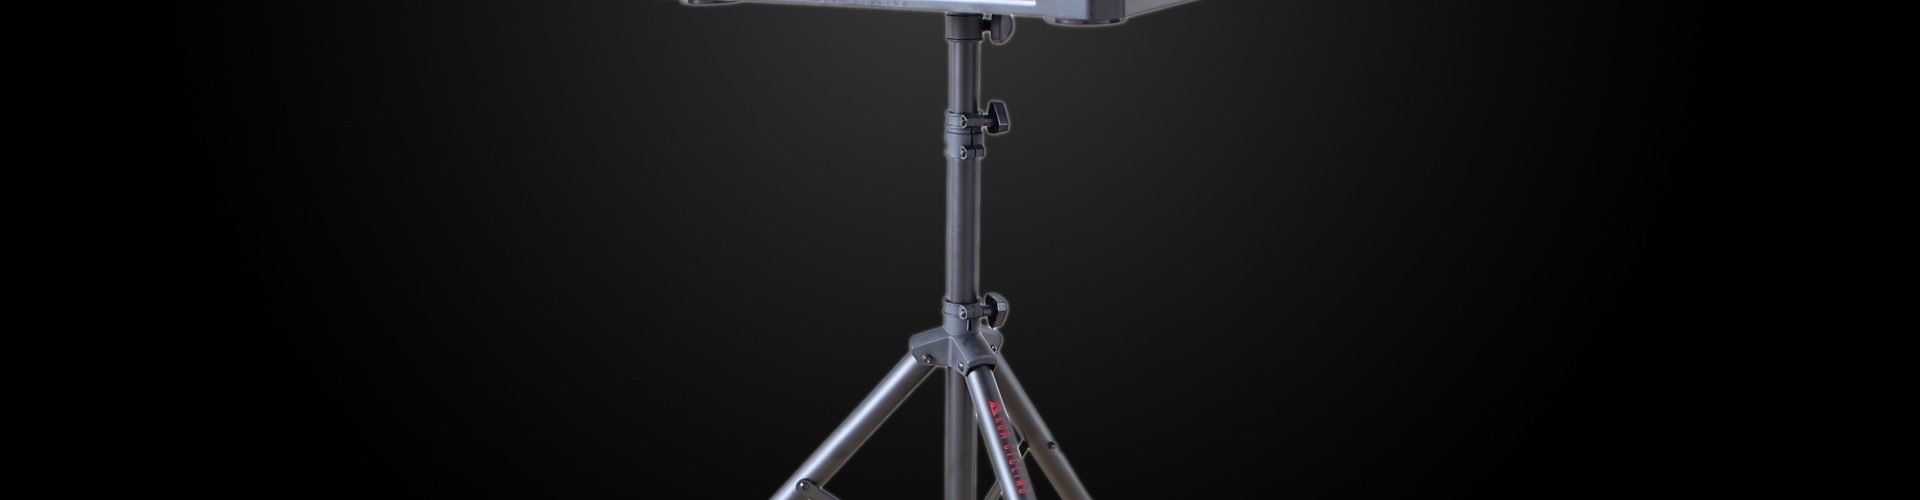 Review: Conquer Adjustable Height Cycling Trainer Desk